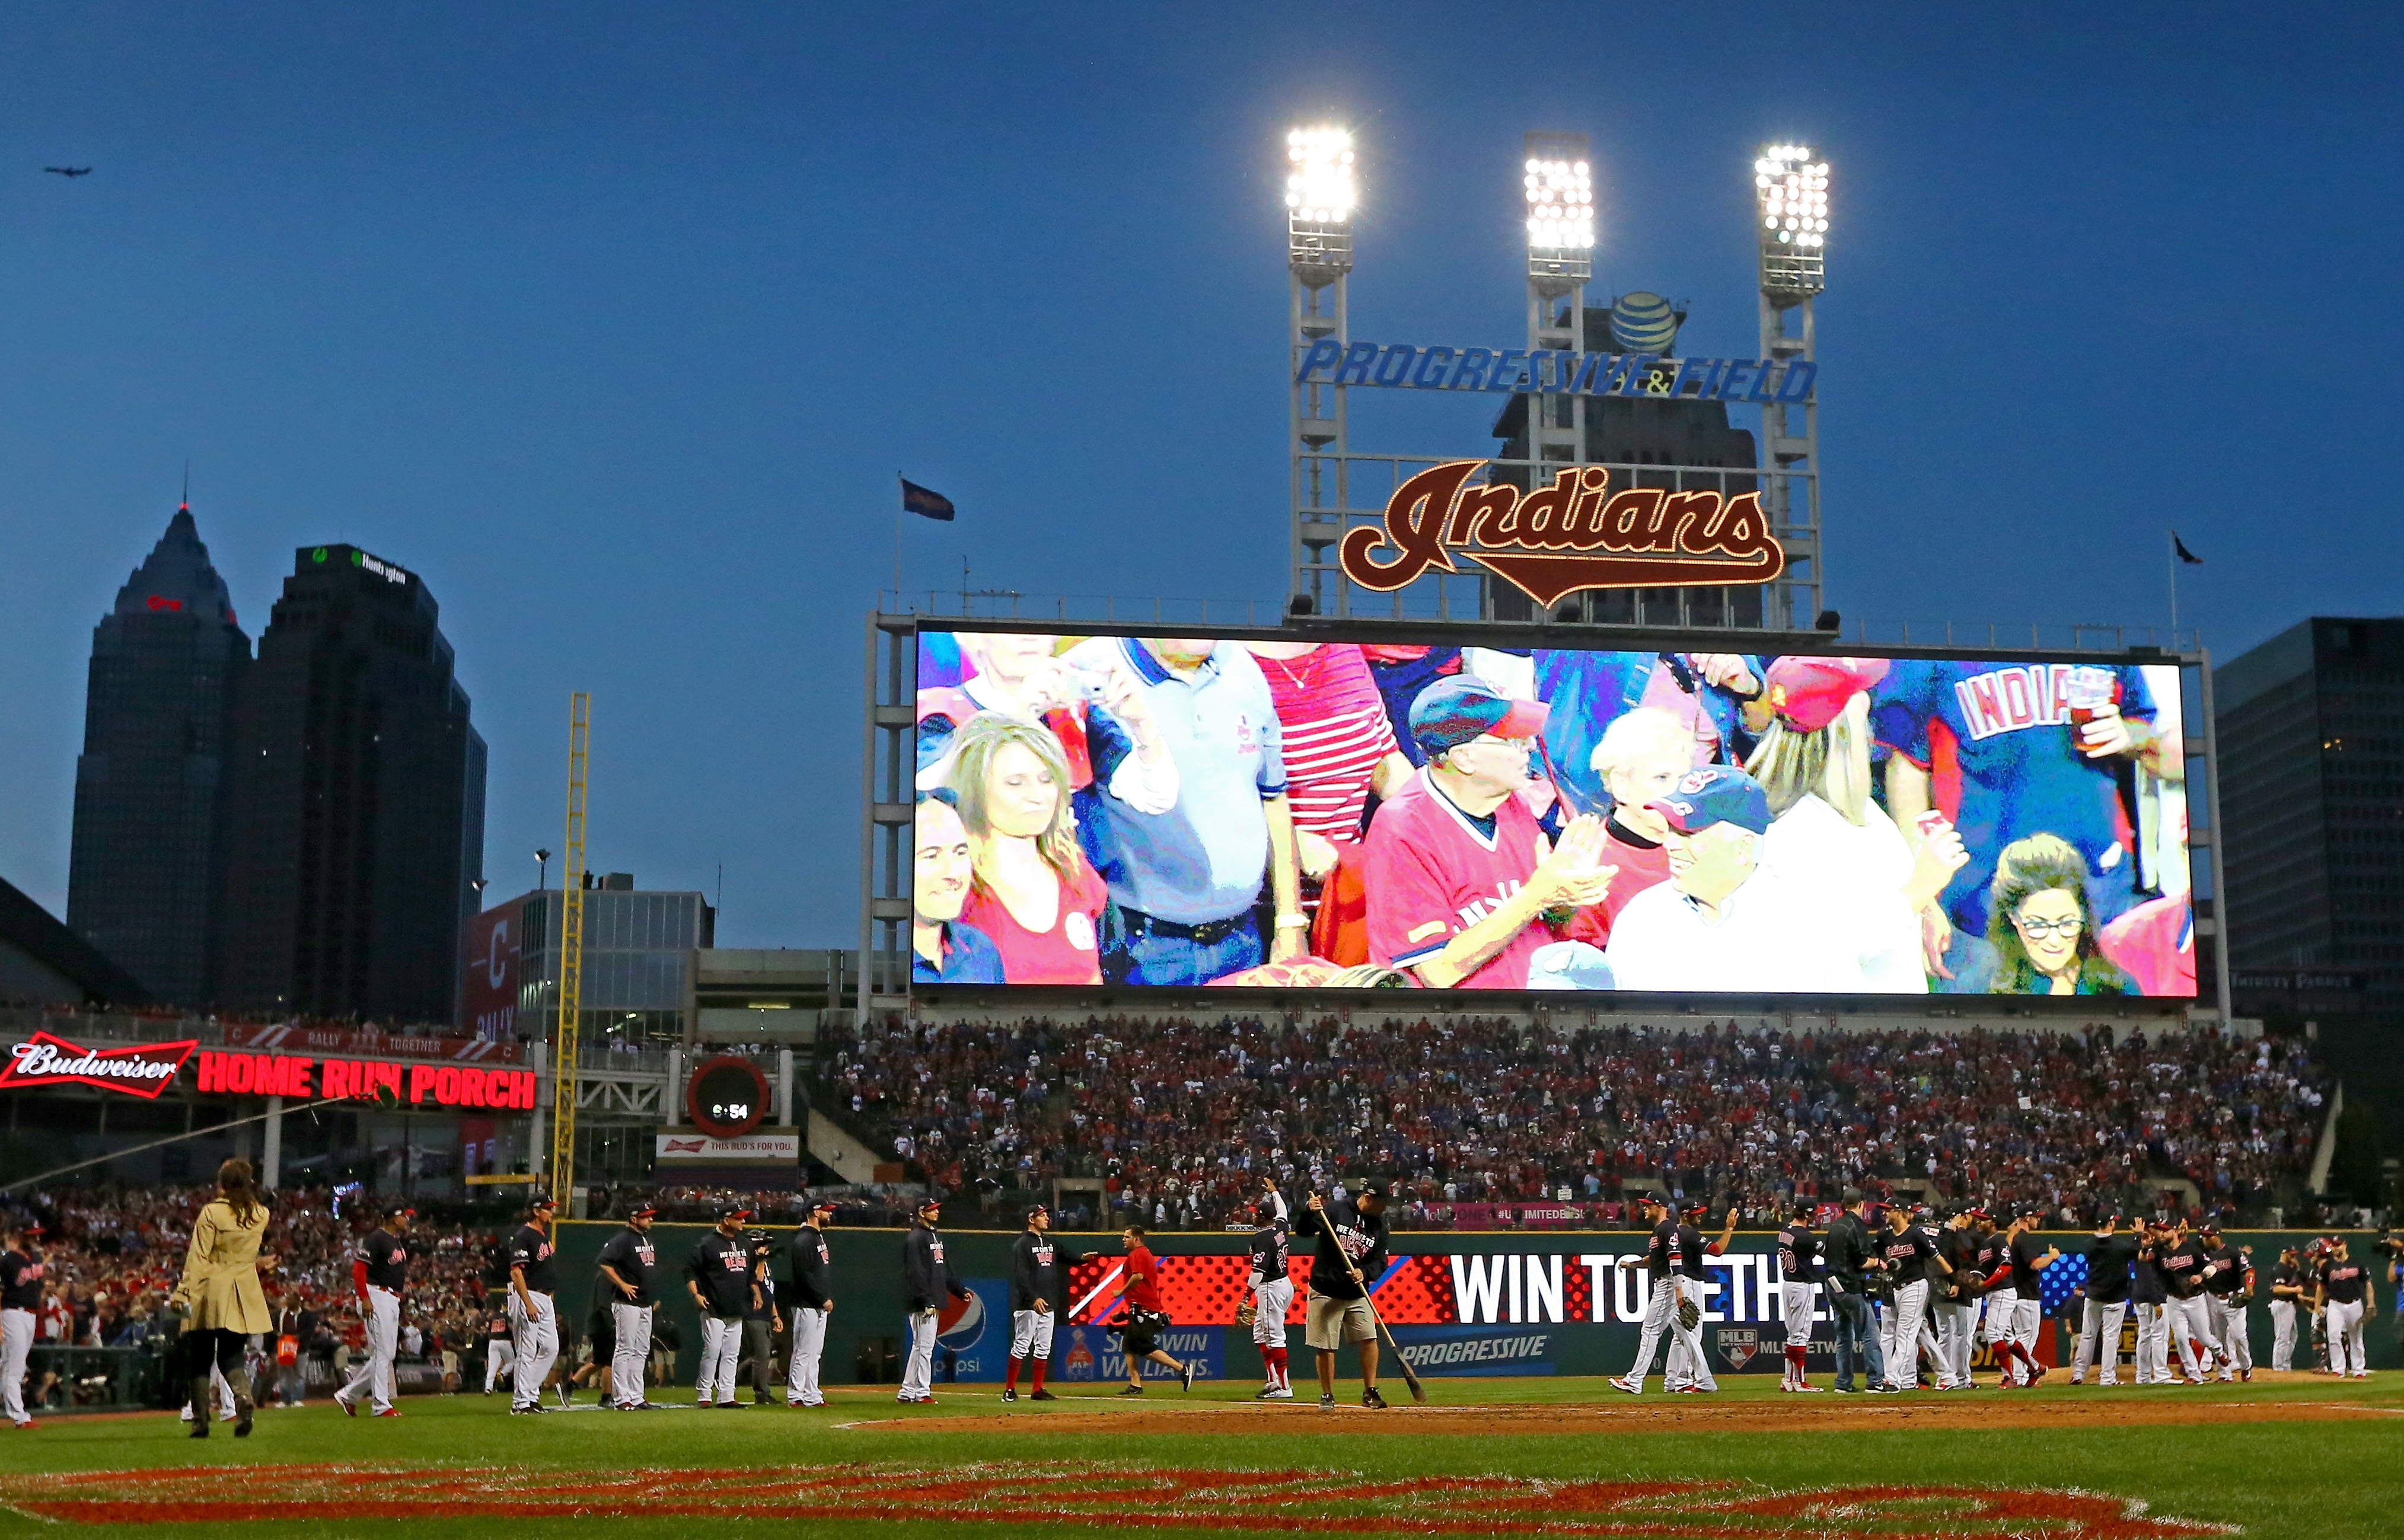 World Series weather, Cleveland weather, what weather for game tonight, weather forecast, October baseball weather